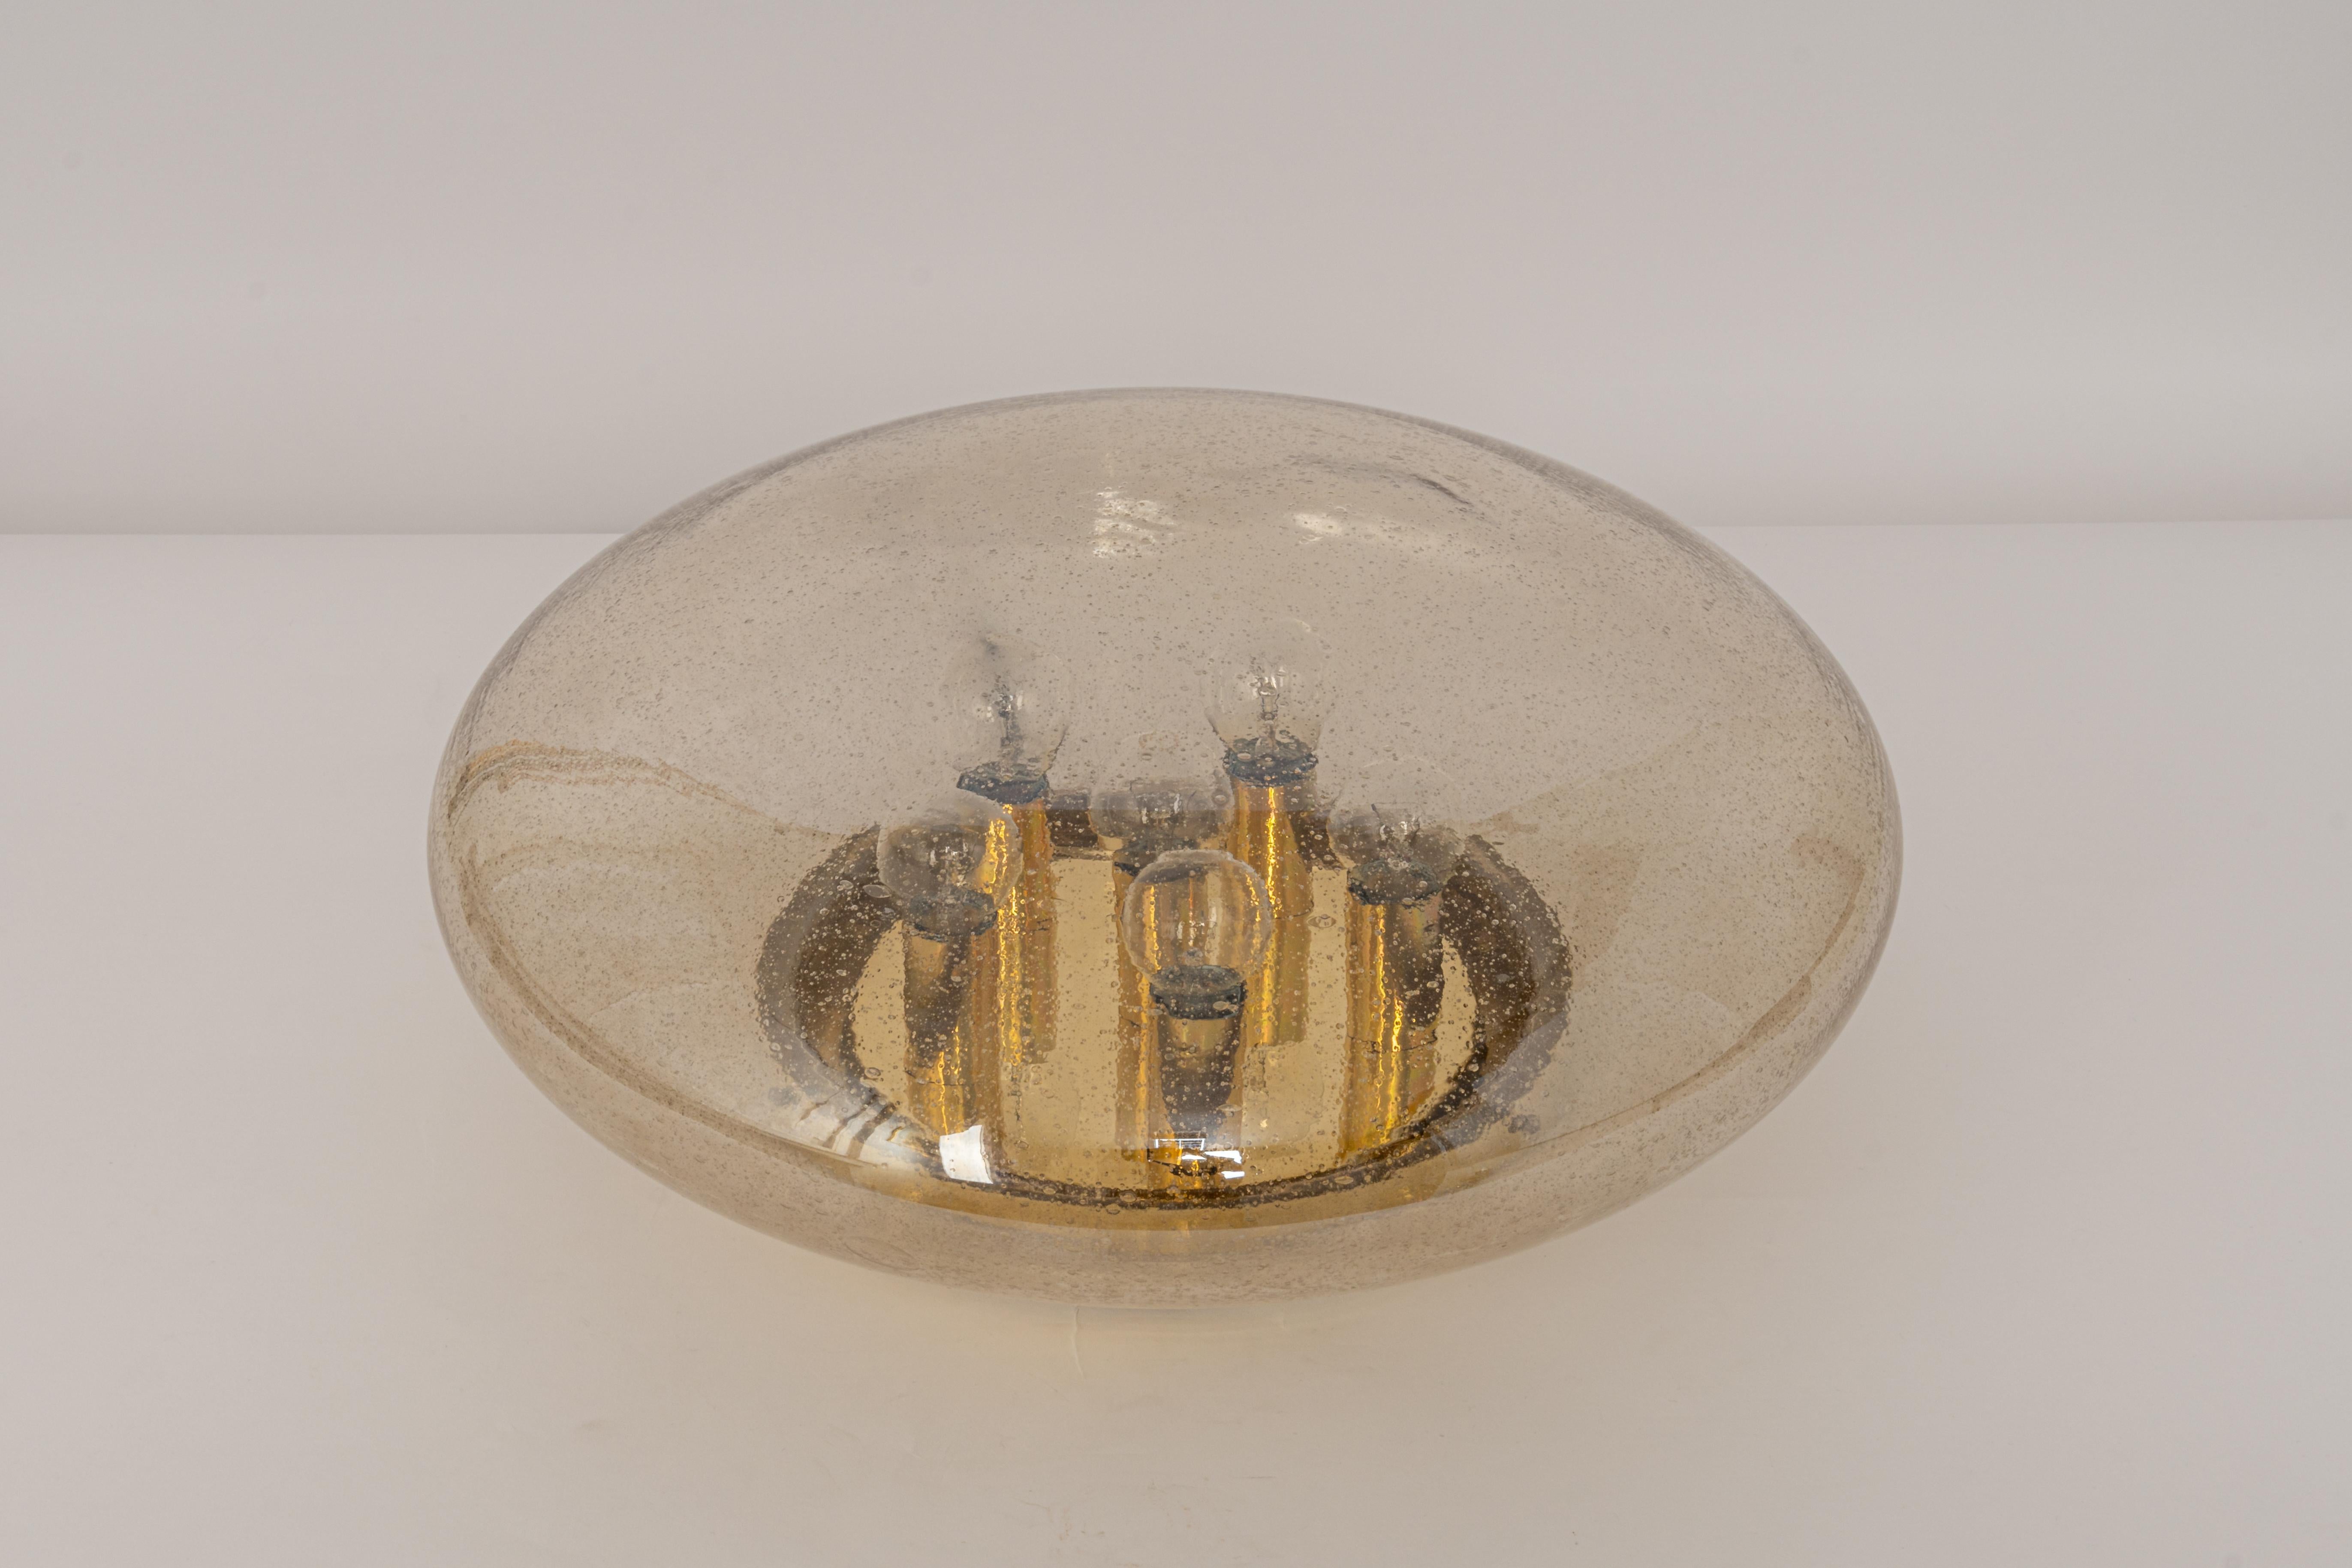 Large smoked Glass flush mount manufactured by Limburg Glashütte Germany, circa 1960-1969. Wonderful spaceship form and a stunning light effect with the raindrops.

High quality and in very good condition. Cleaned, well-wired, and ready to use.